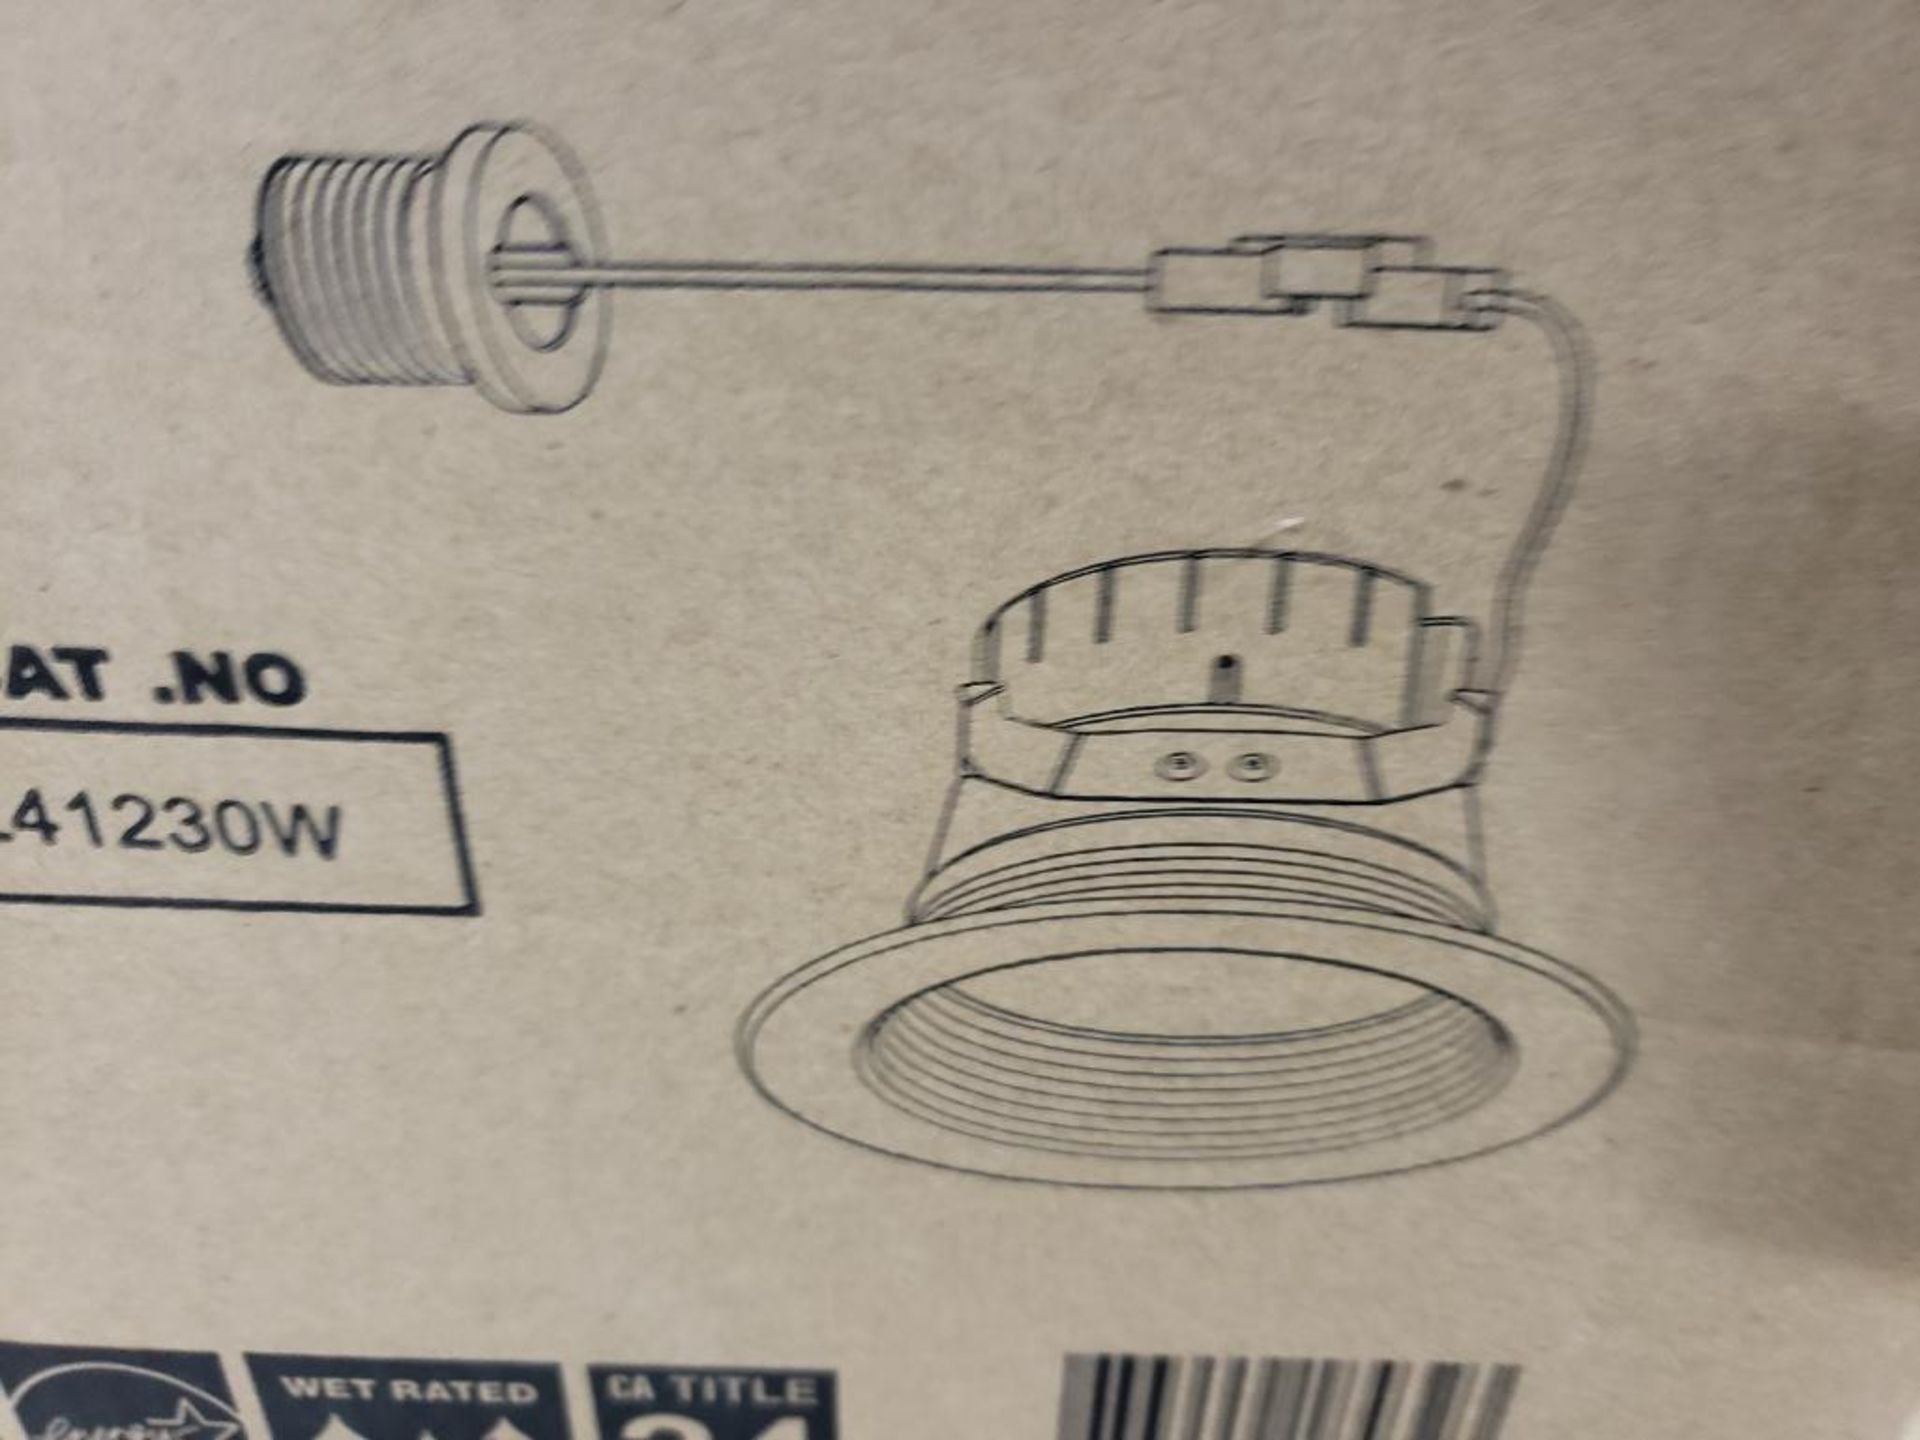 Qty 19 - Elco Lighting EL41230W light recess. New in box. - Image 2 of 8